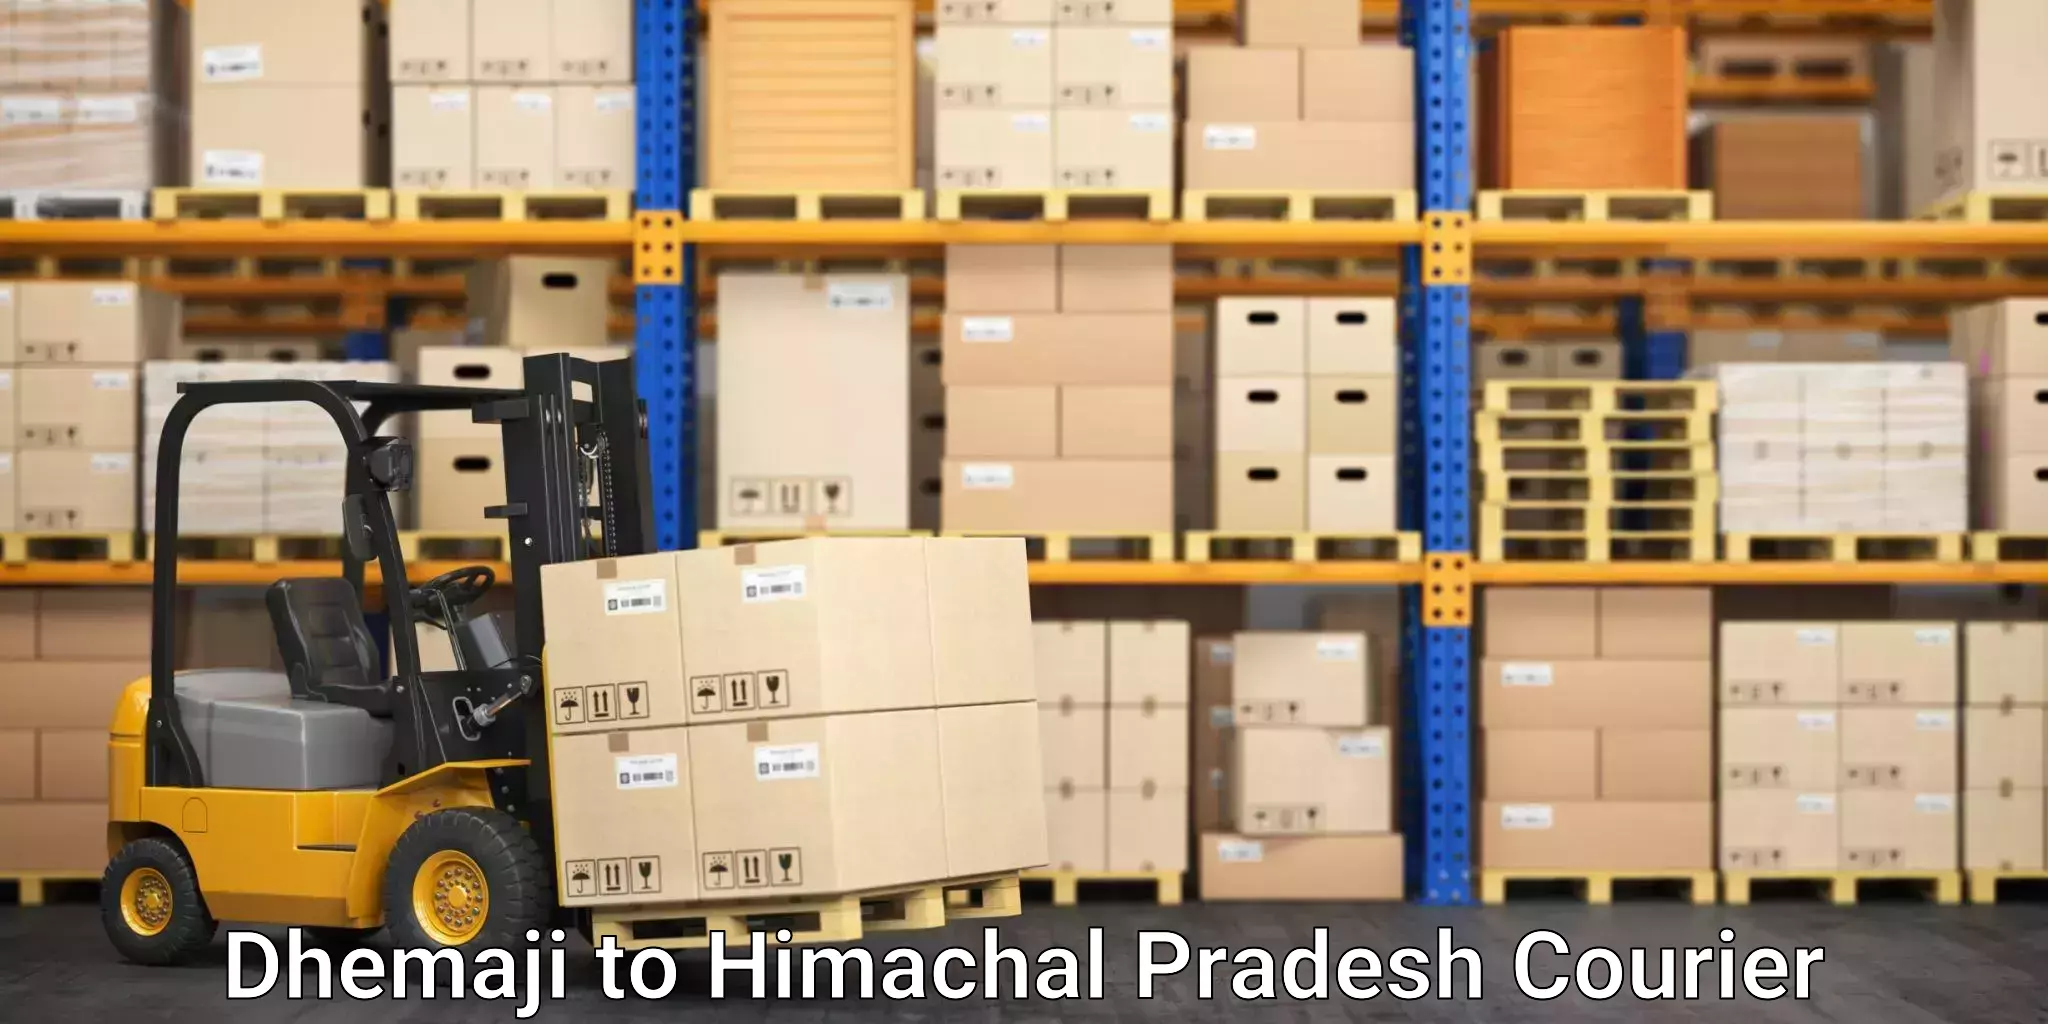 Same-day delivery solutions Dhemaji to Himachal Pradesh